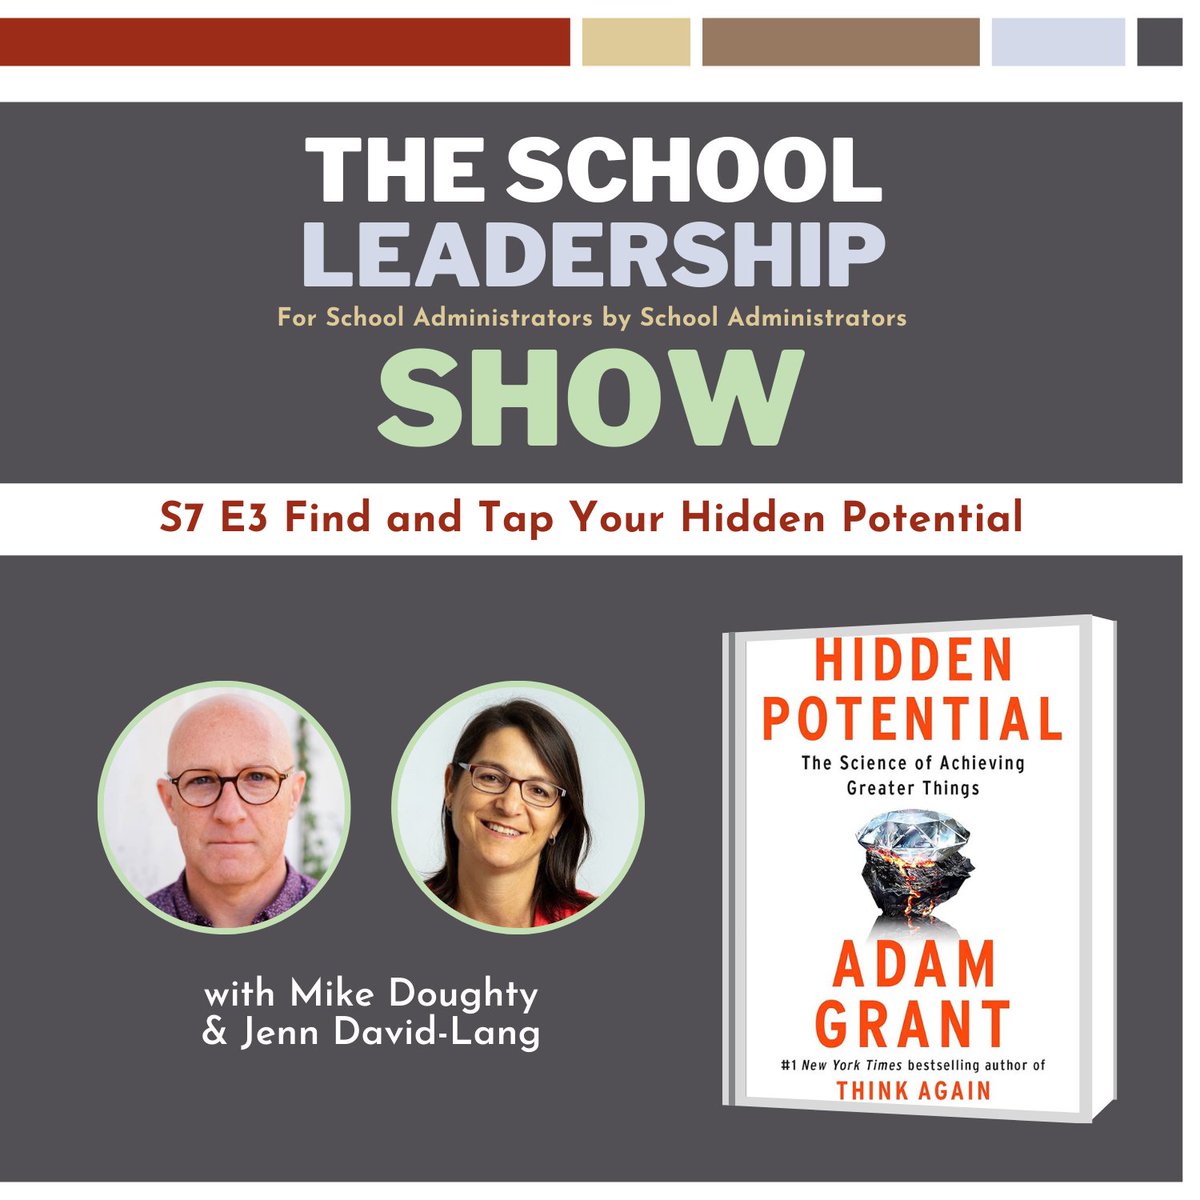 💥 Ready to discover your hidden potential? Dive into our latest podcast episode where we discuss @AdamMGrant's book and insights on how to transform your approach as an educator. Don't miss out on practical strategies to achieve greater things! 🎧➡️: schoolleadershipshow.com/107-s7-e3-find…